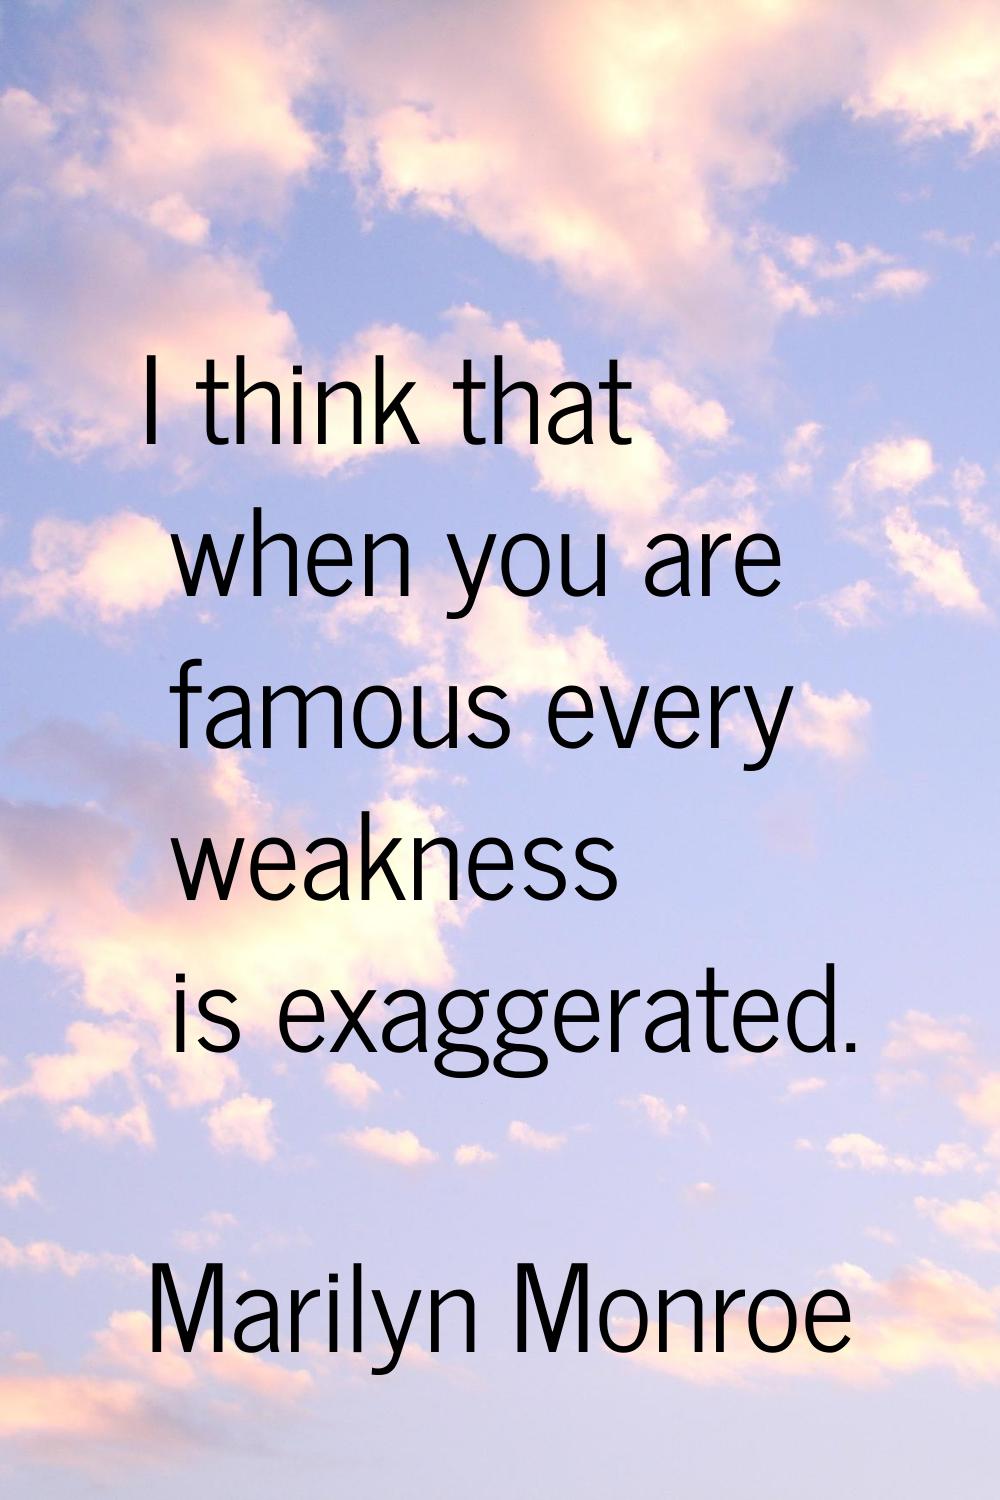 I think that when you are famous every weakness is exaggerated.